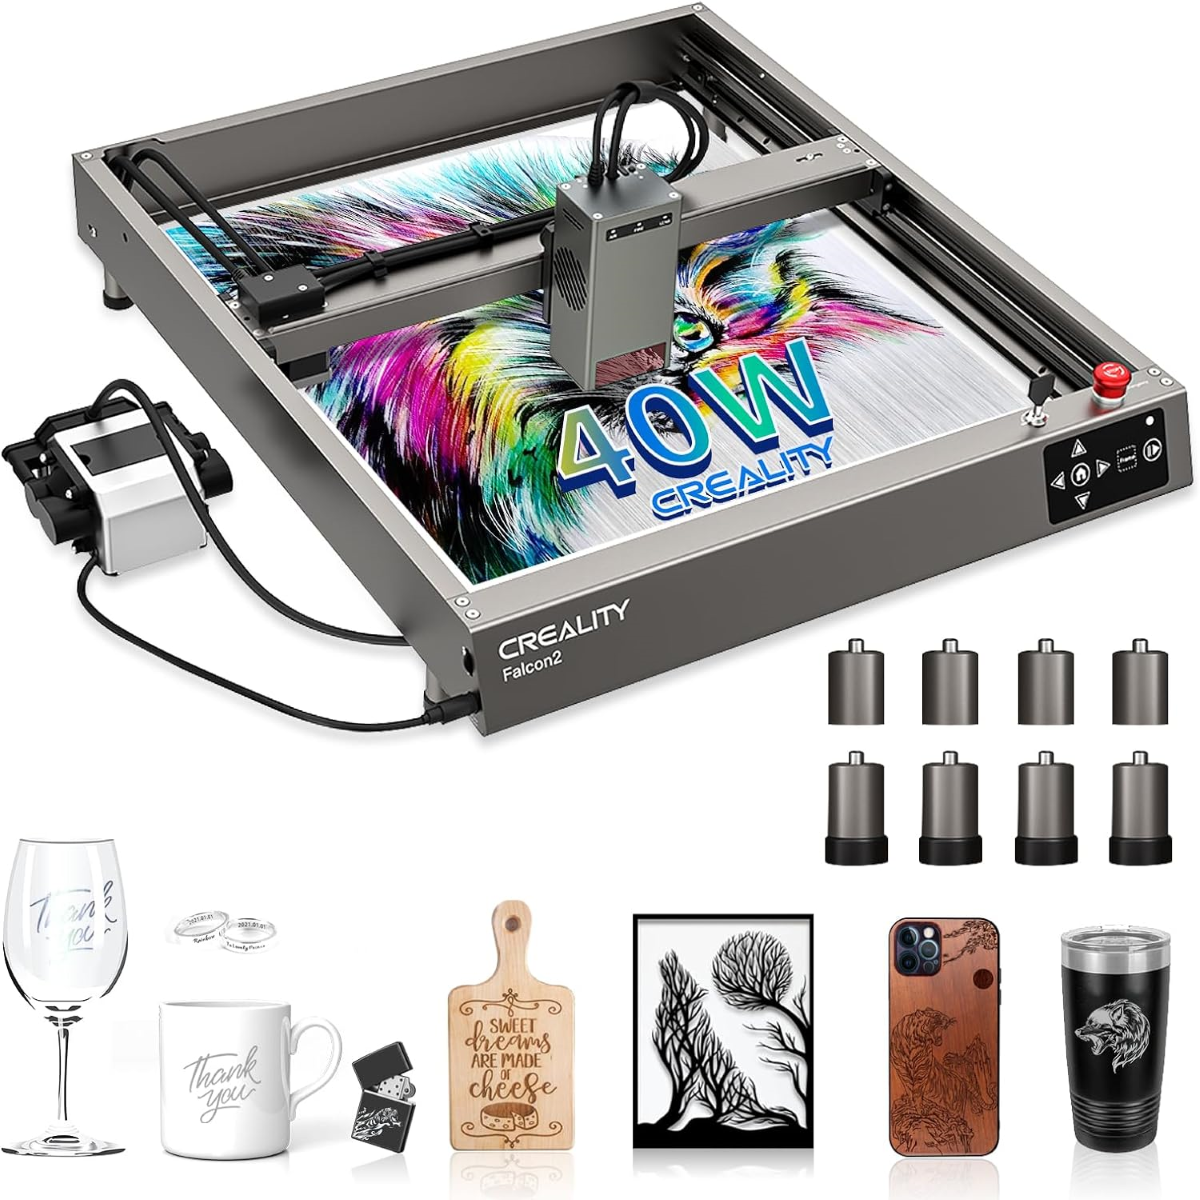 Official Creality Falcon 2 Laser Engraver, 40W Output Laser Engraver Machine, DIY Laser Cutter and Engraver Machine